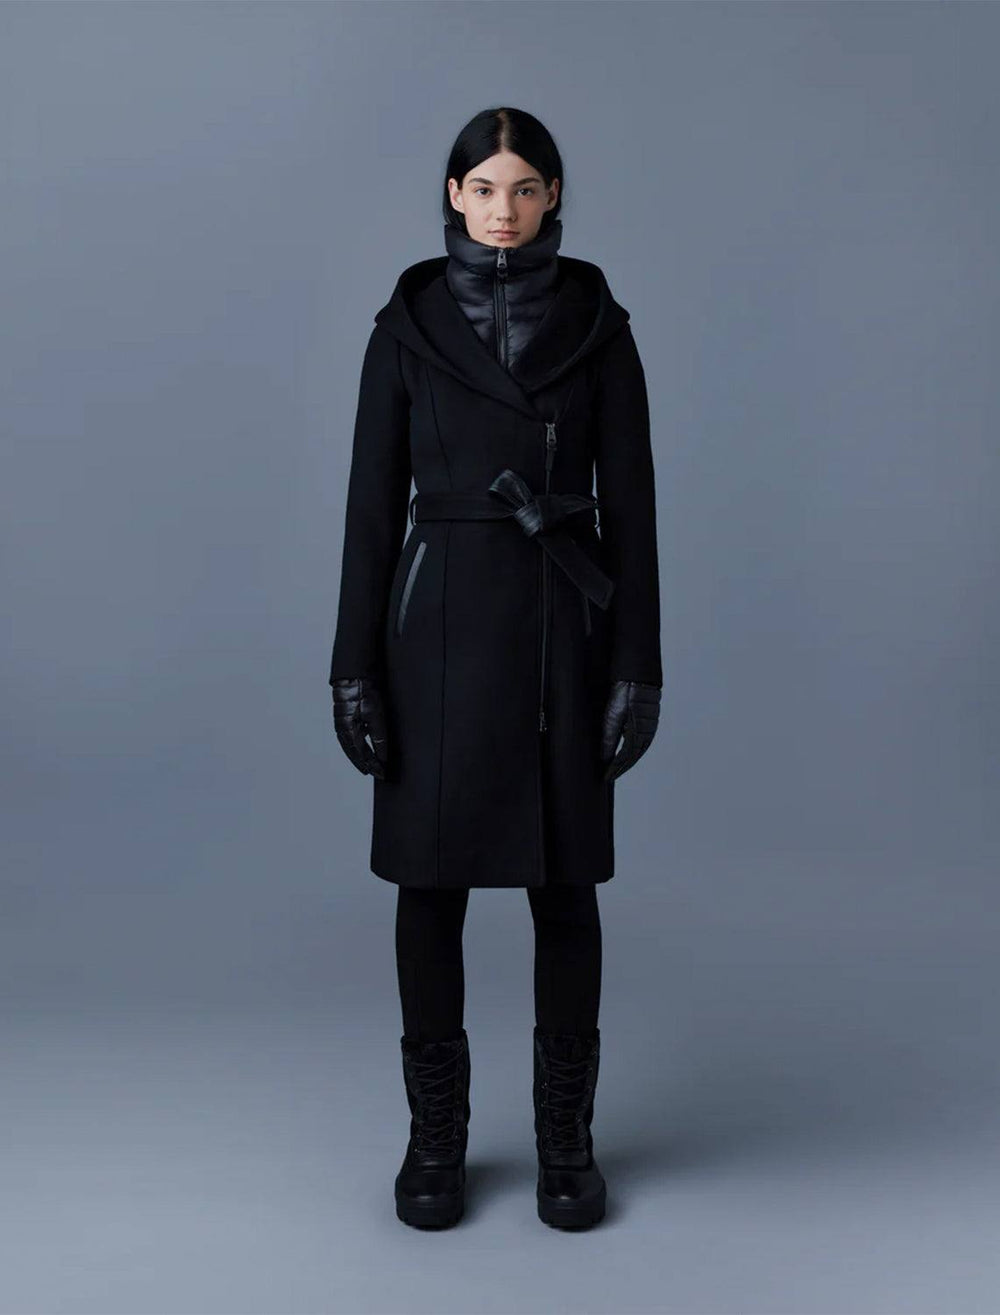 model wearing shia coat in black with leather trim with black gloves, pants, and boots